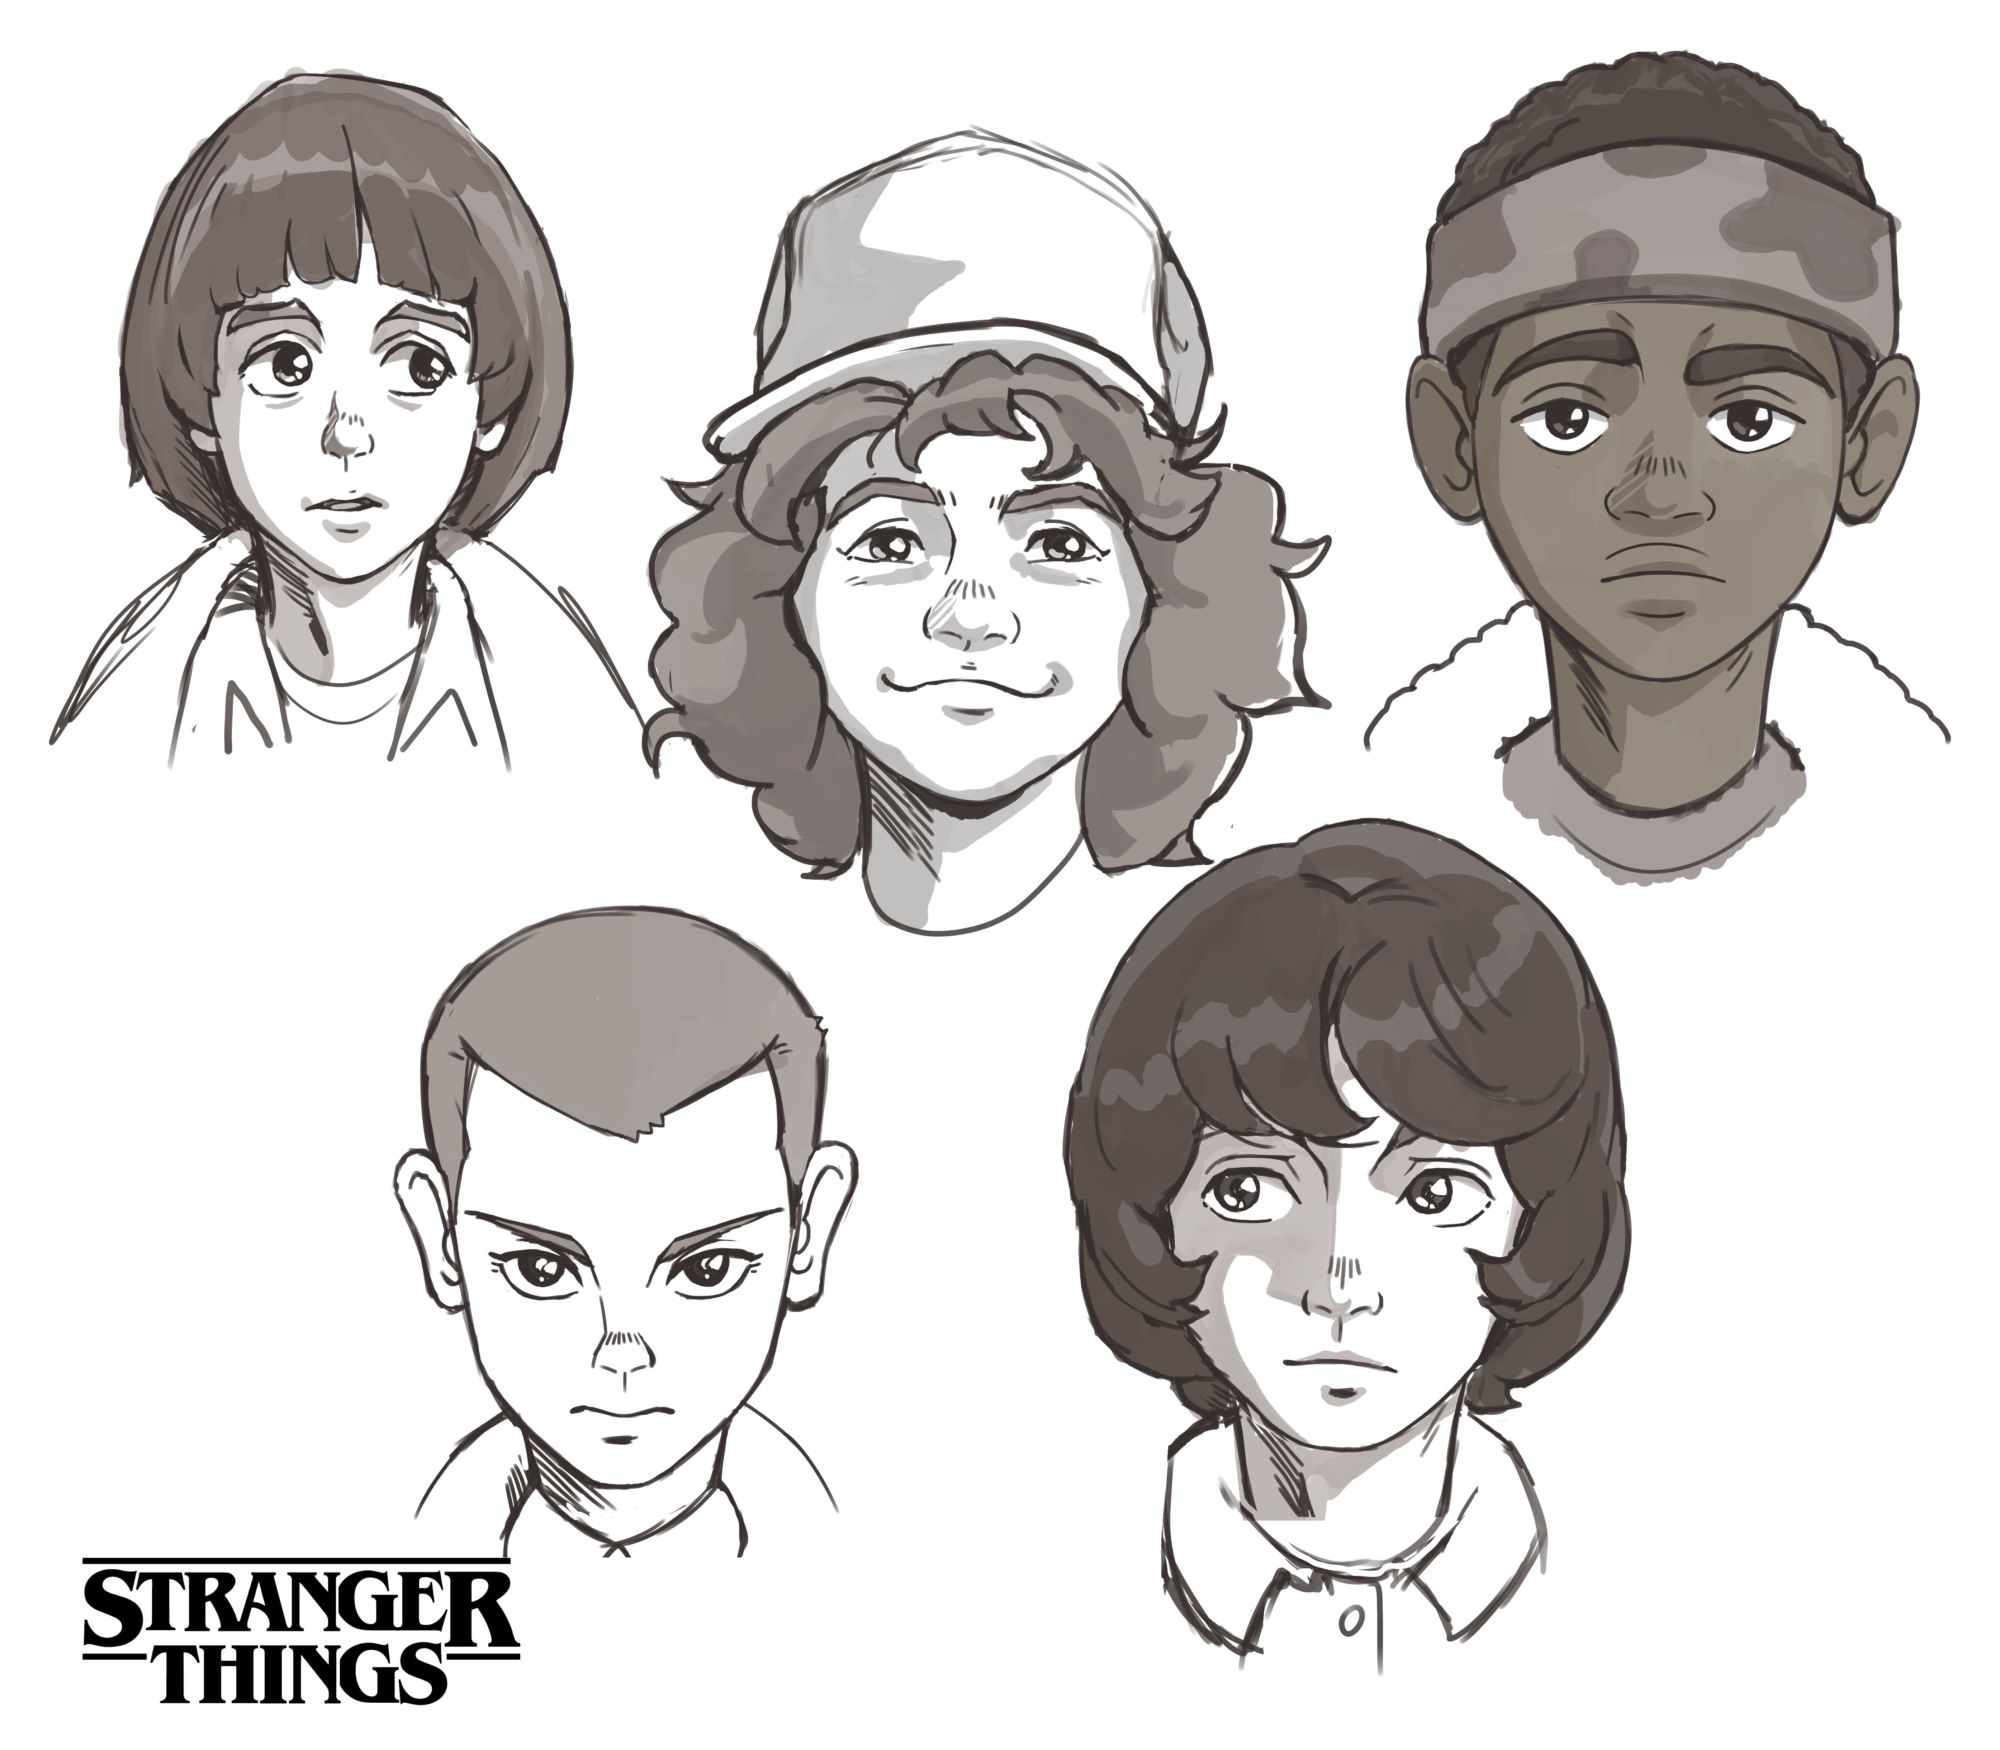 Stranger Things' Gets Re-imagined as an '80s Anime